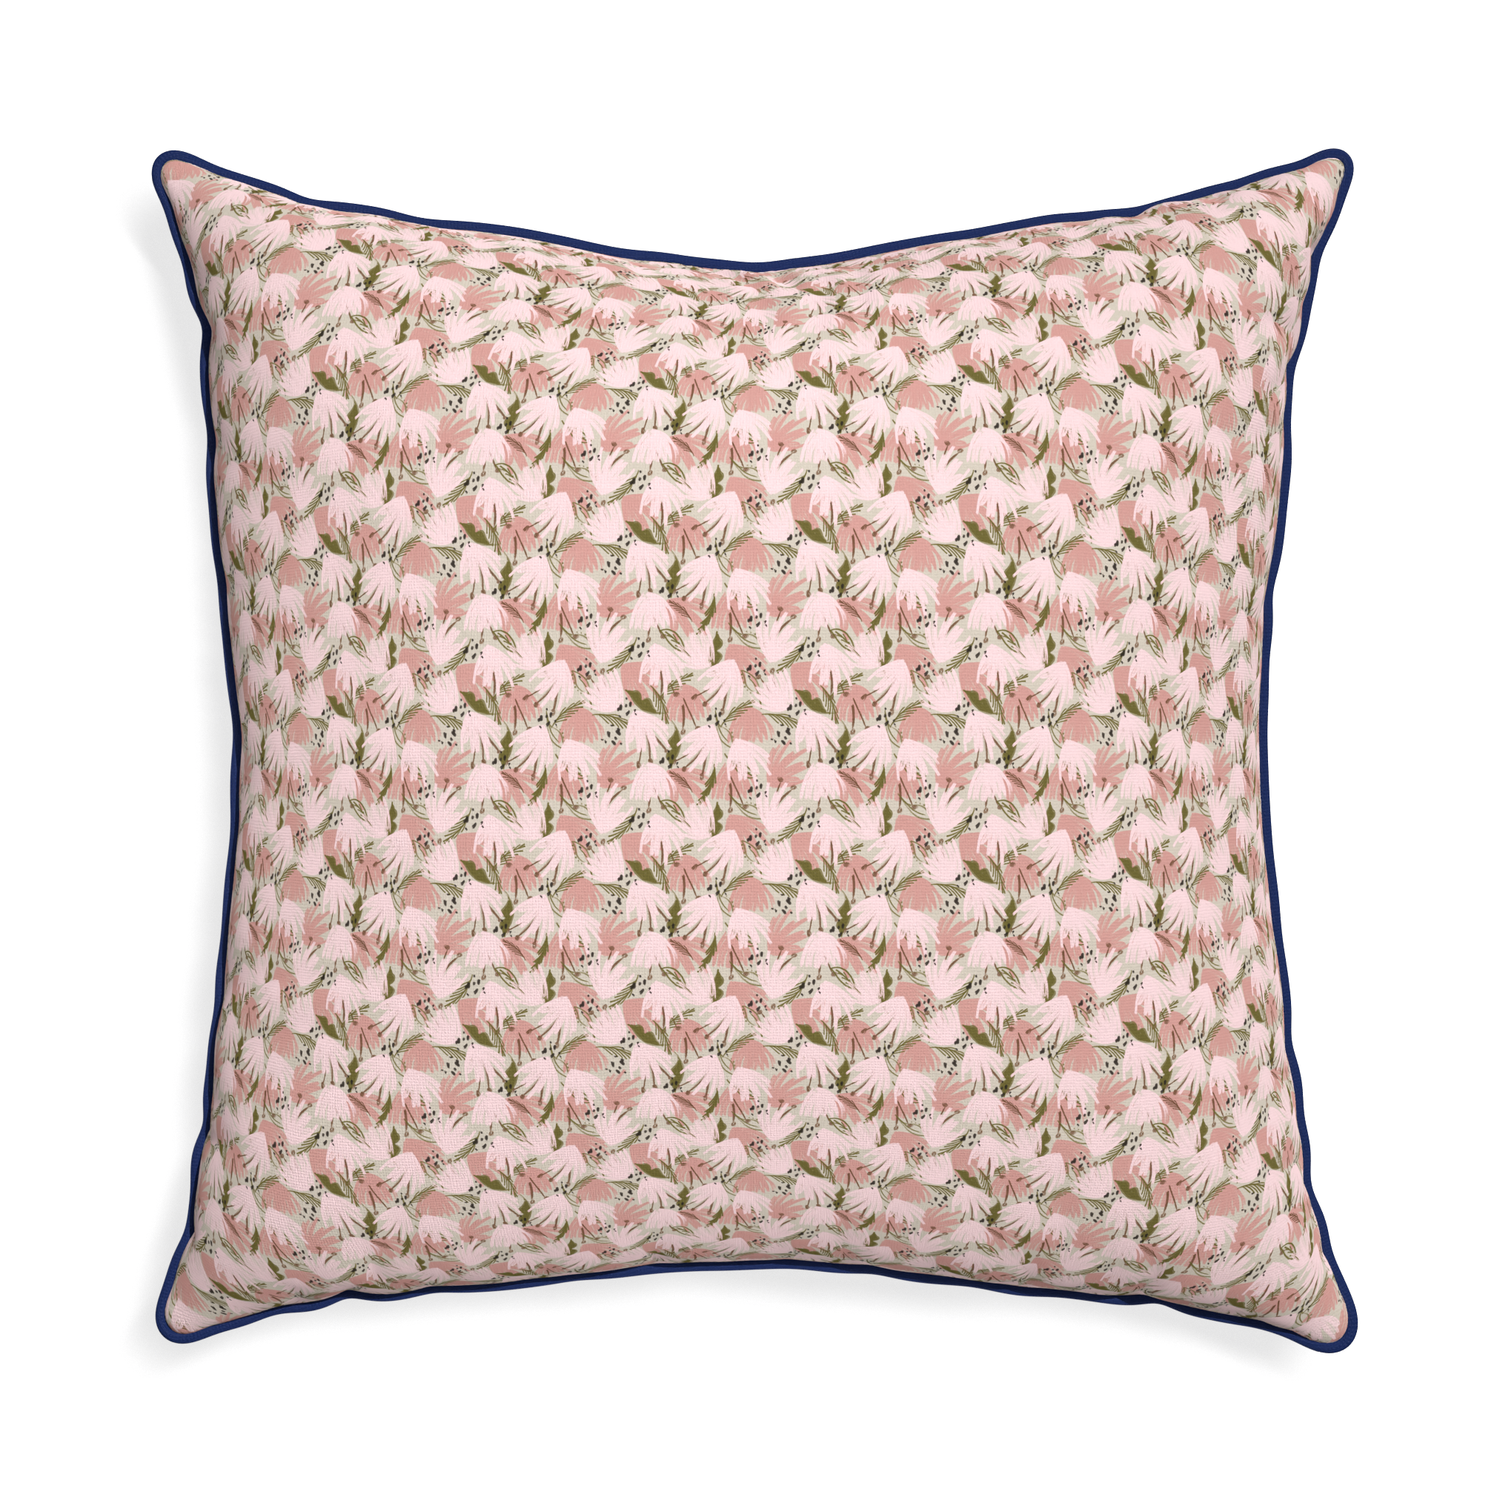 Euro-sham eden pink custom pink floralpillow with midnight piping on white background